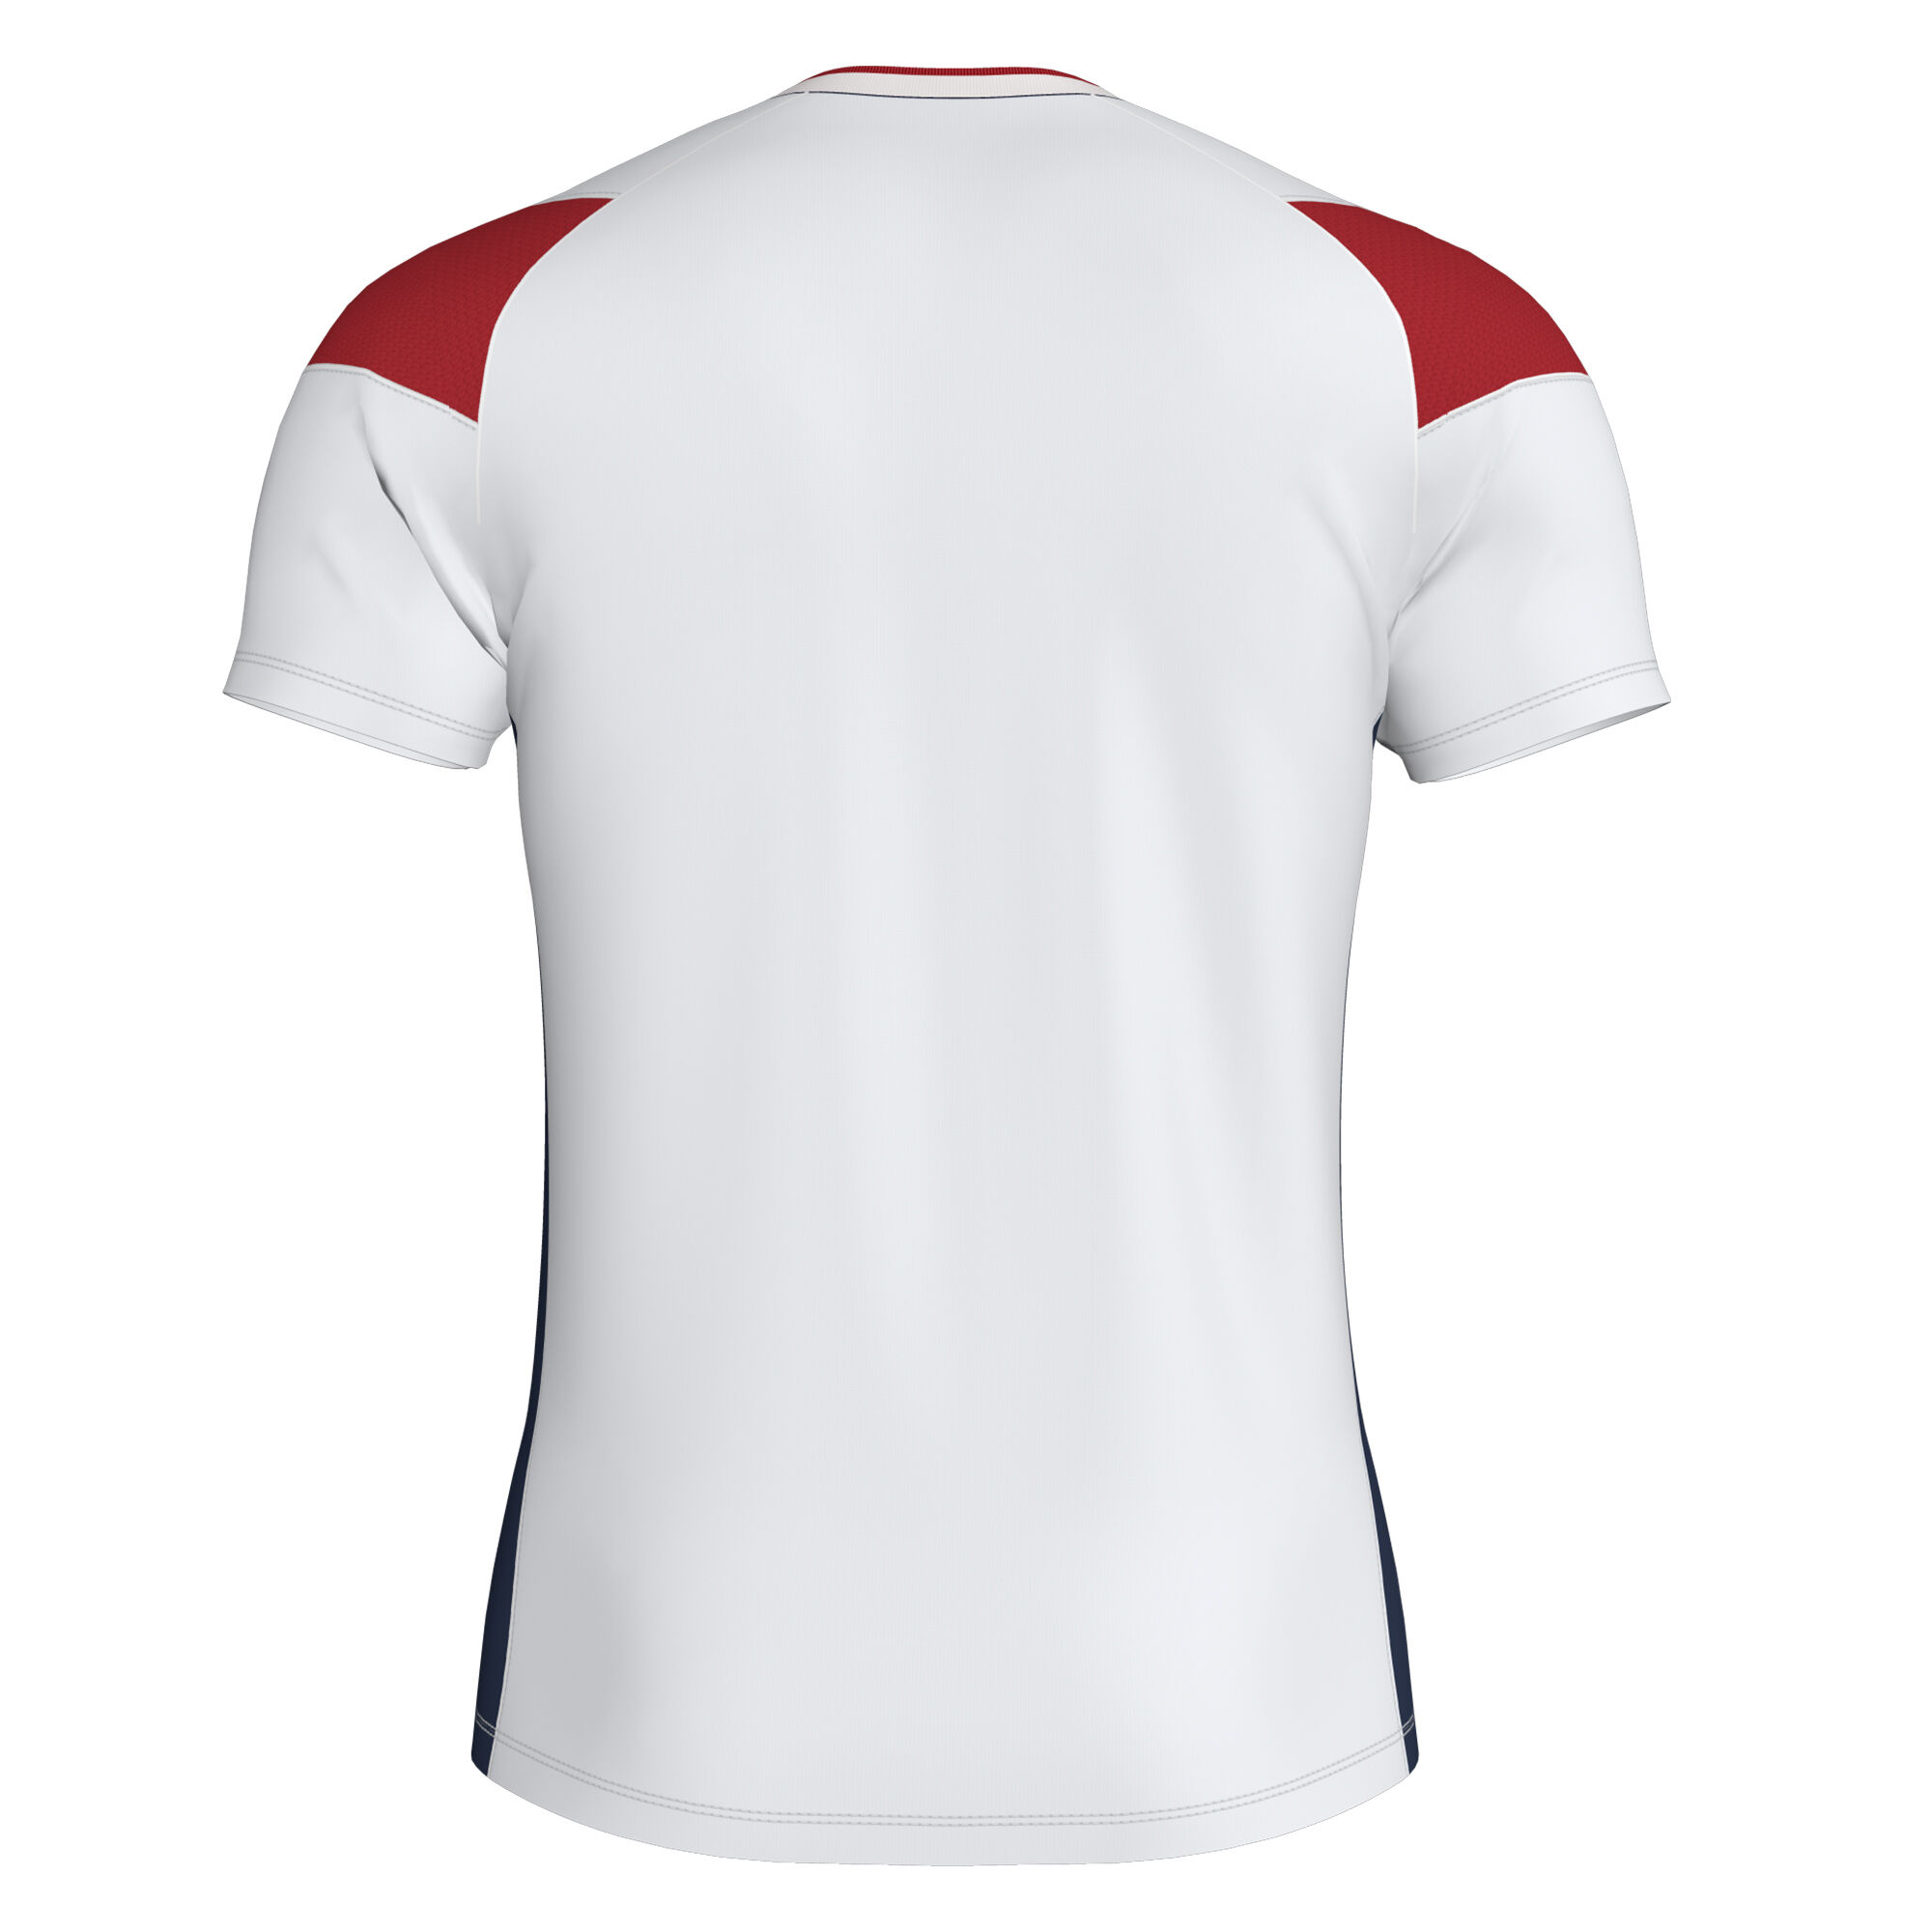 MAILLOT MANCHES COURTES HOMME CREW III BLANC ROUGE BLEU MARINE